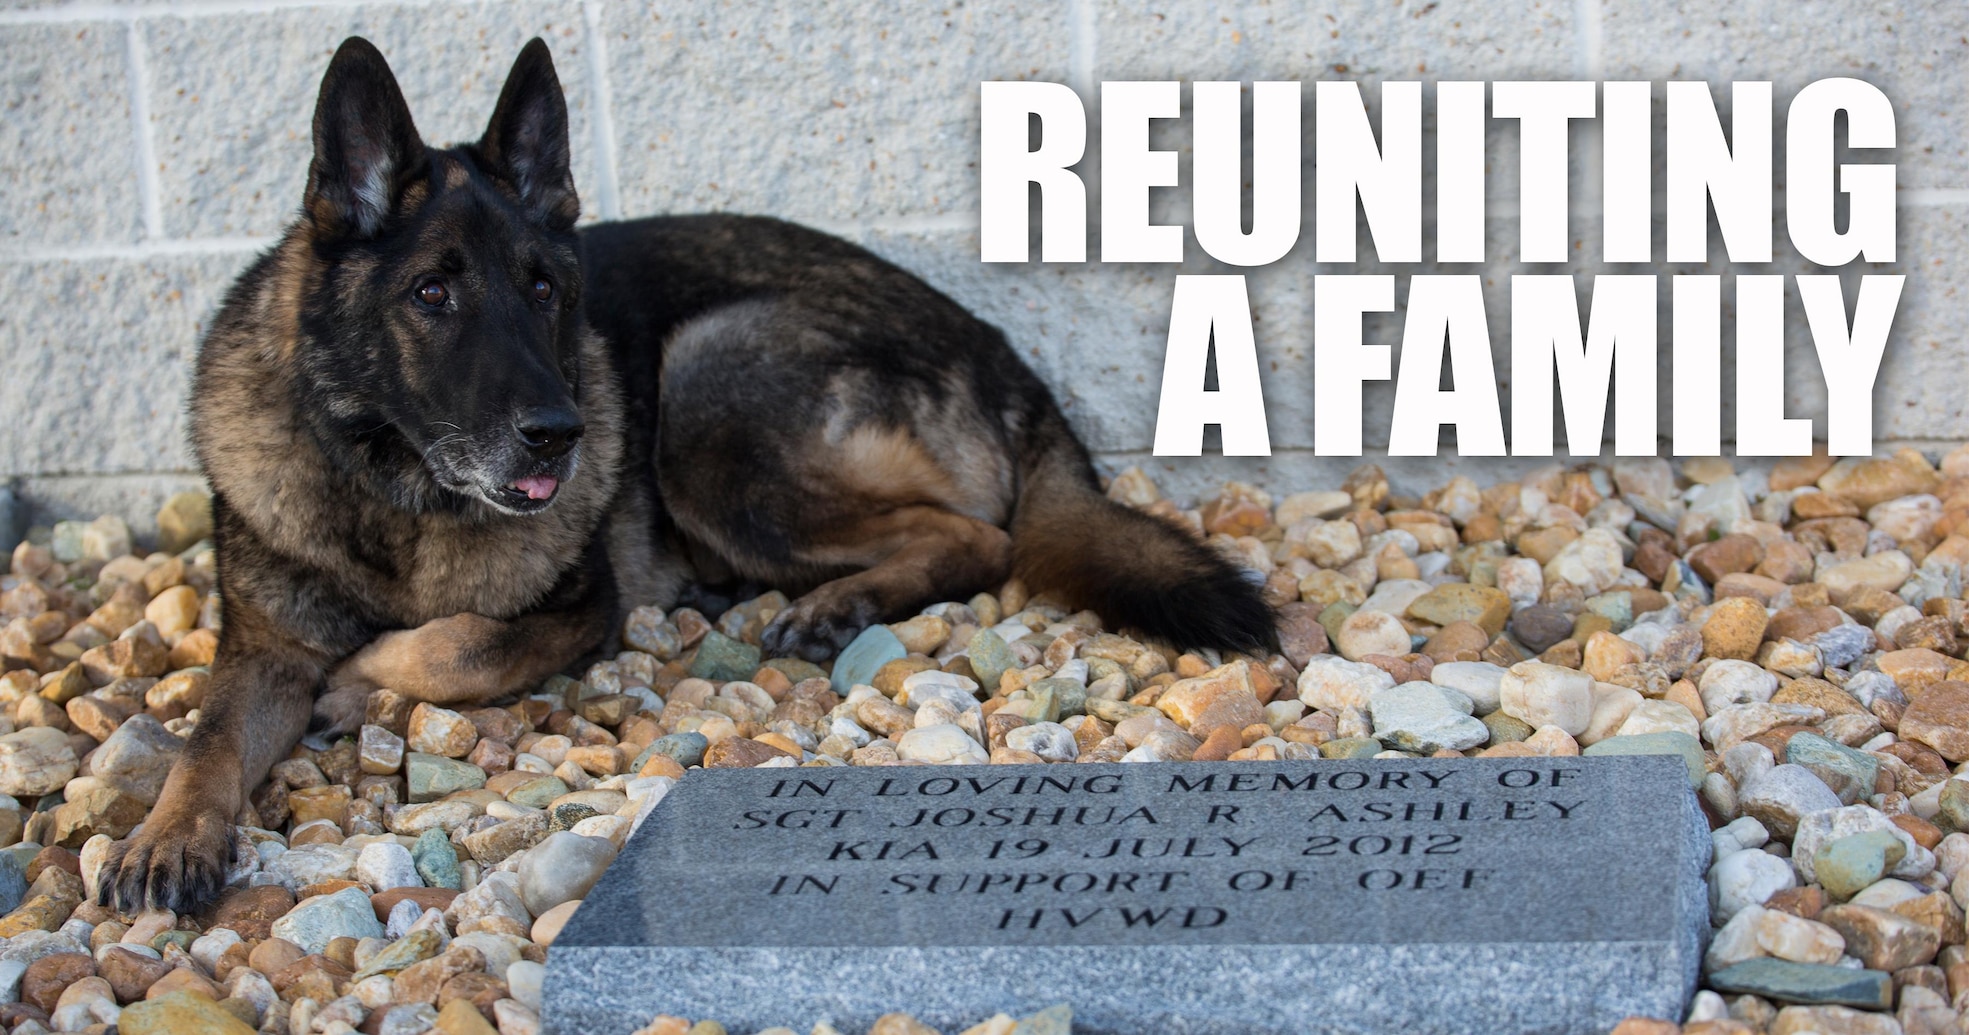 Military Working Dog Sirius sits near the memorial stone of his former handler, Sgt. Joshua Ashley, outside of 2nd Law Enforcement Battalion’s Ashley Kennels at Camp Lejeune, N.C., Feb. 25, 2016, shortly after his retirement ceremony and adoption. Sirius’ former handler, Sgt. Joshua Ashley, was killed while on patrol in 2012 in support of Operation Enduring Freedom. Ashley’s family adopted Sirius, in keeping with the fallen Marine’s wishes. (U.S. Marine Corps Photo by Cpl. Michelle Reif/Released.)